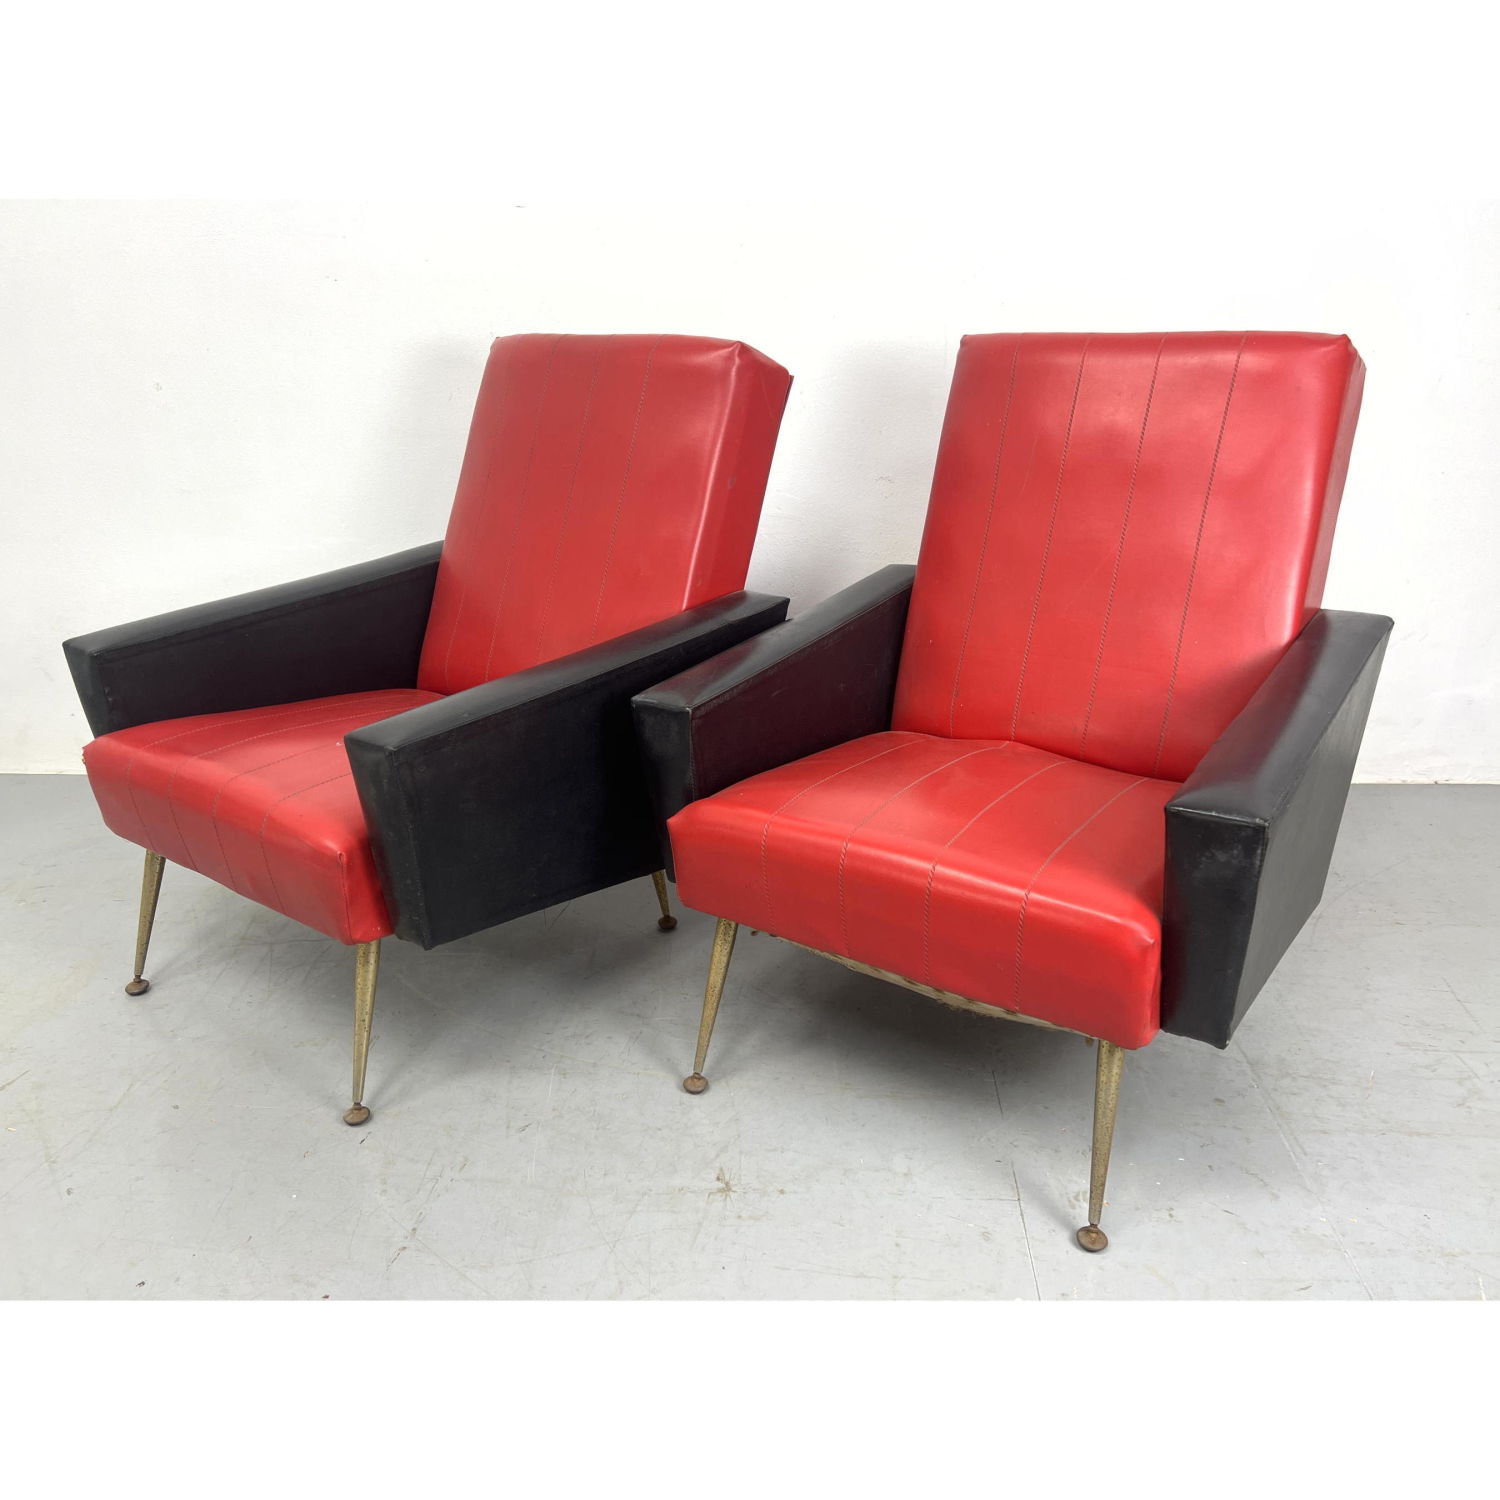 Pair of Red and Black Italian lounge